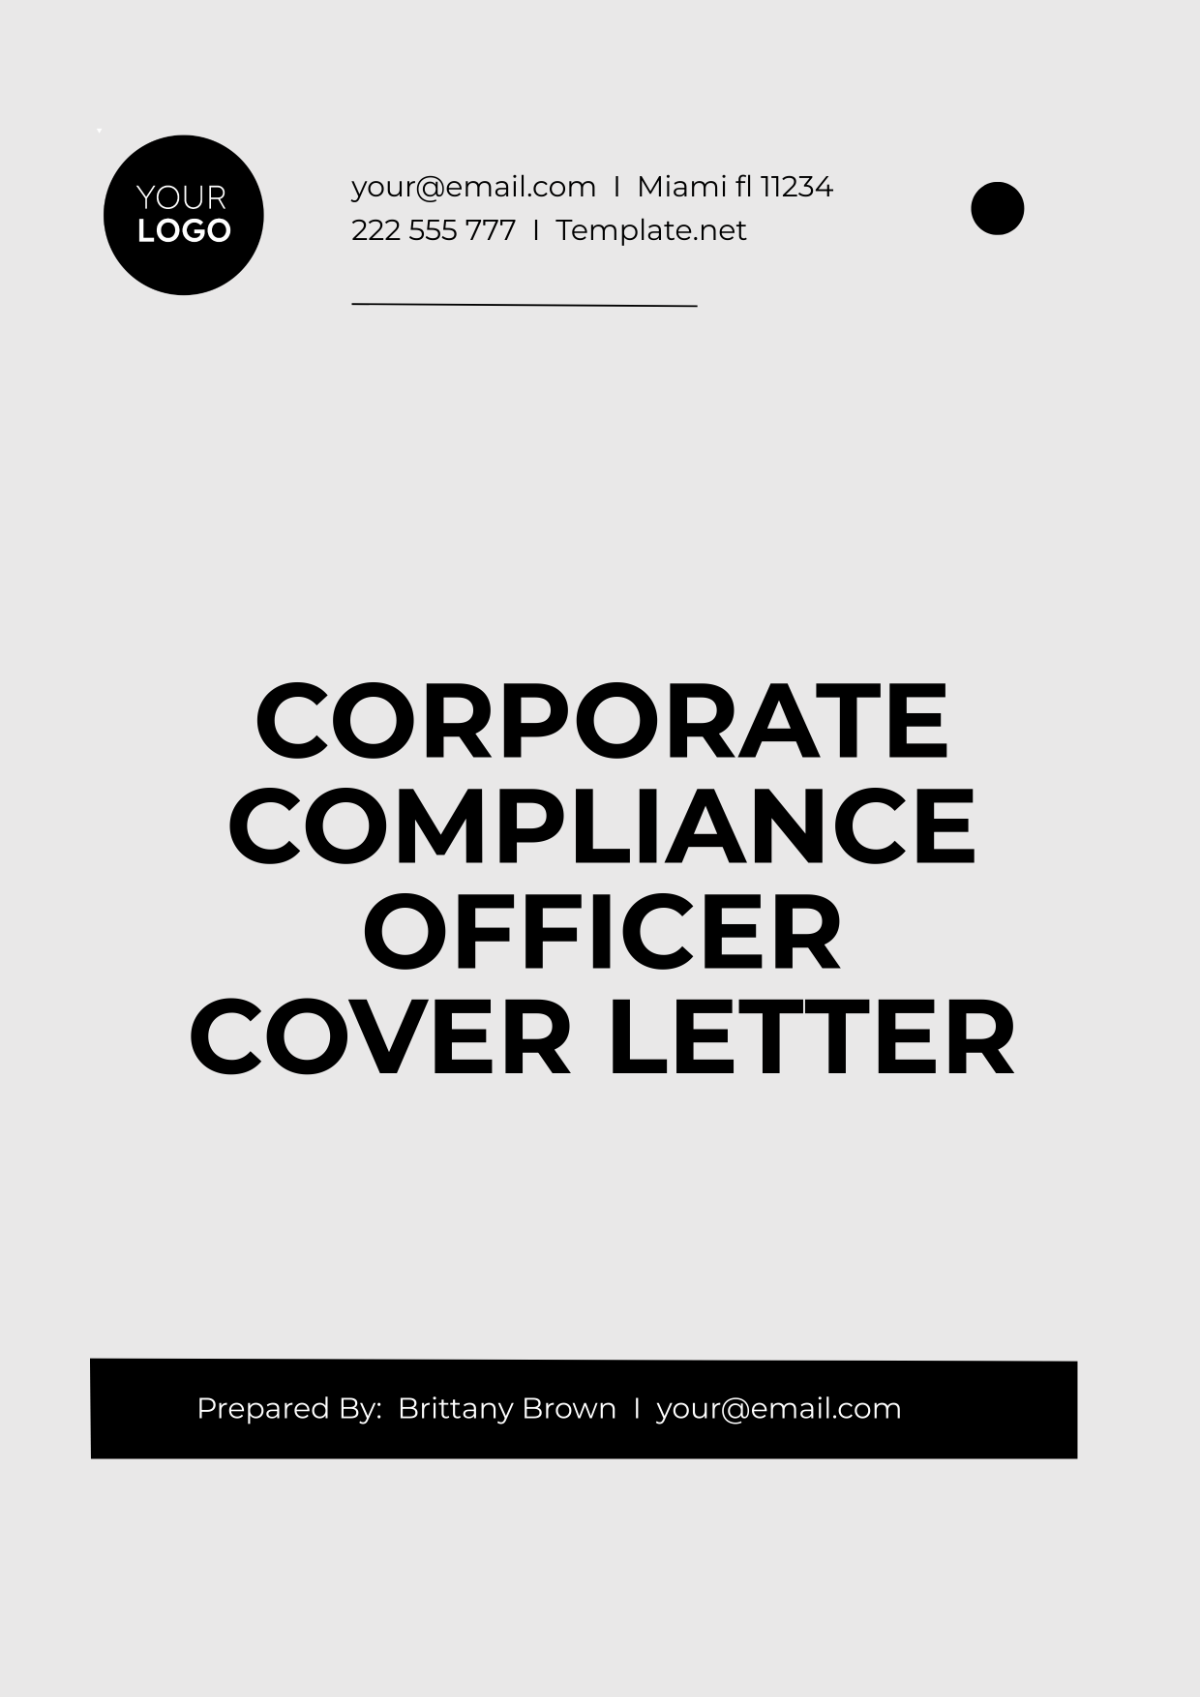 Corporate Compliance Officer Cover Letter Template